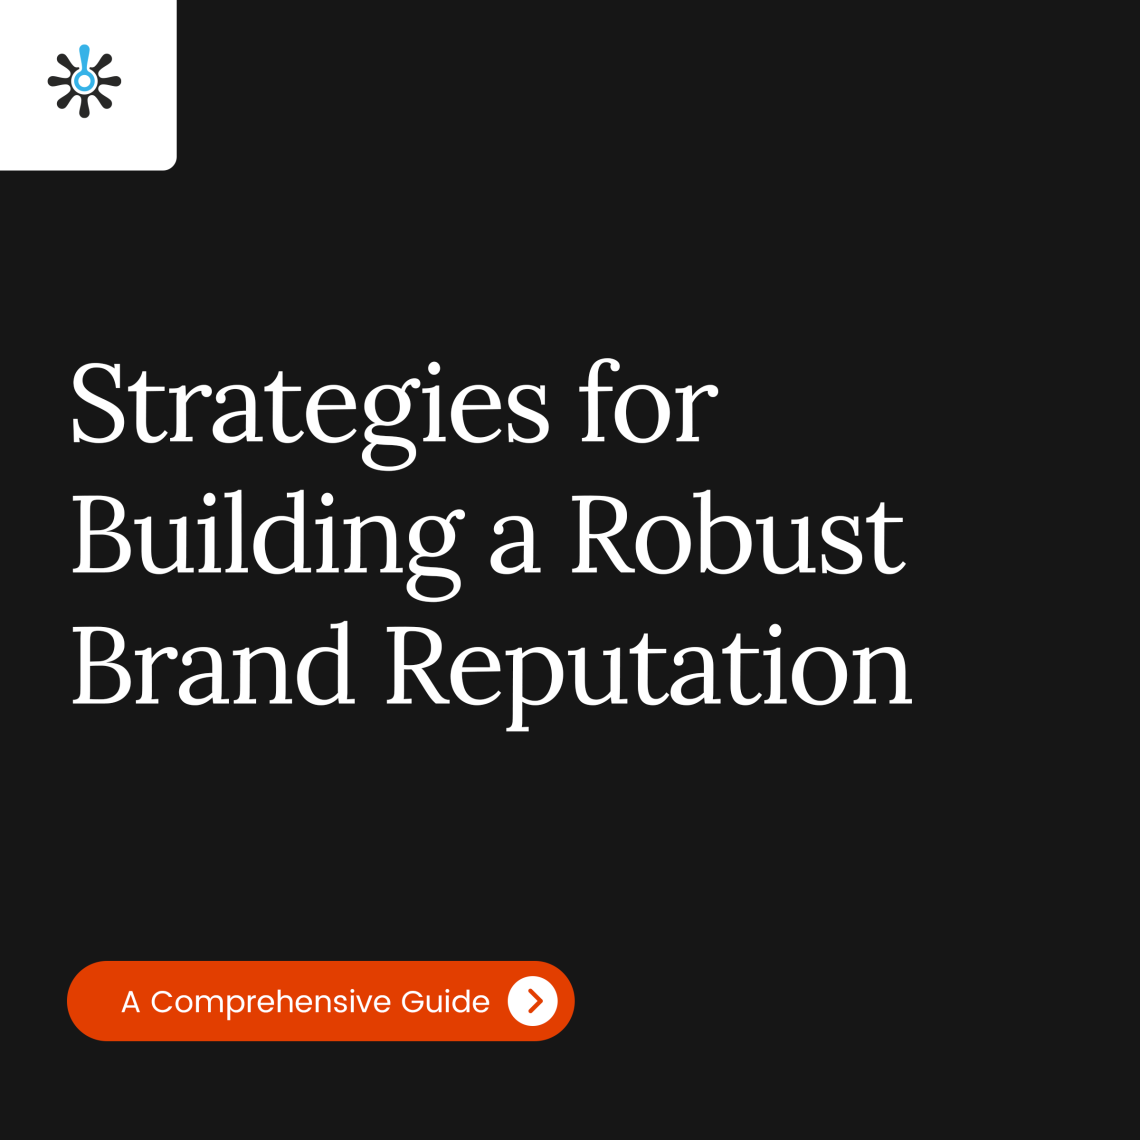 Title Page Reading "Strategies for Building a Robust Brand Reputation"